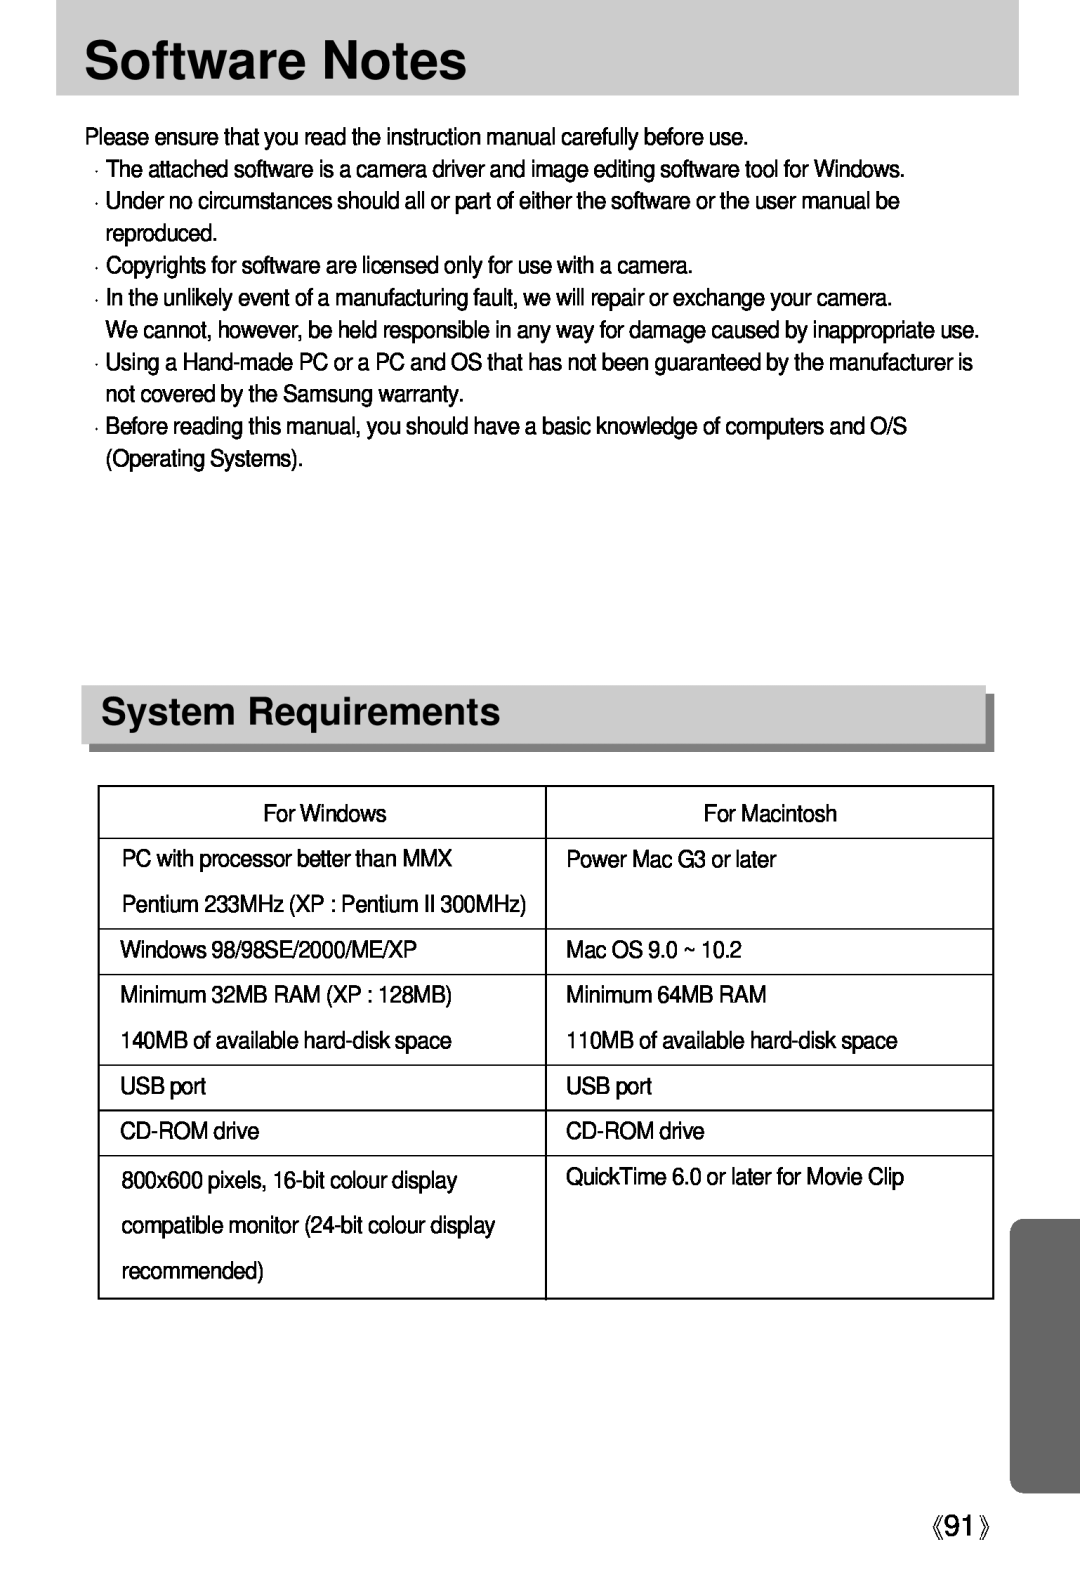 Samsung Digimax U-CA user manual Software Notes, System Requirements 